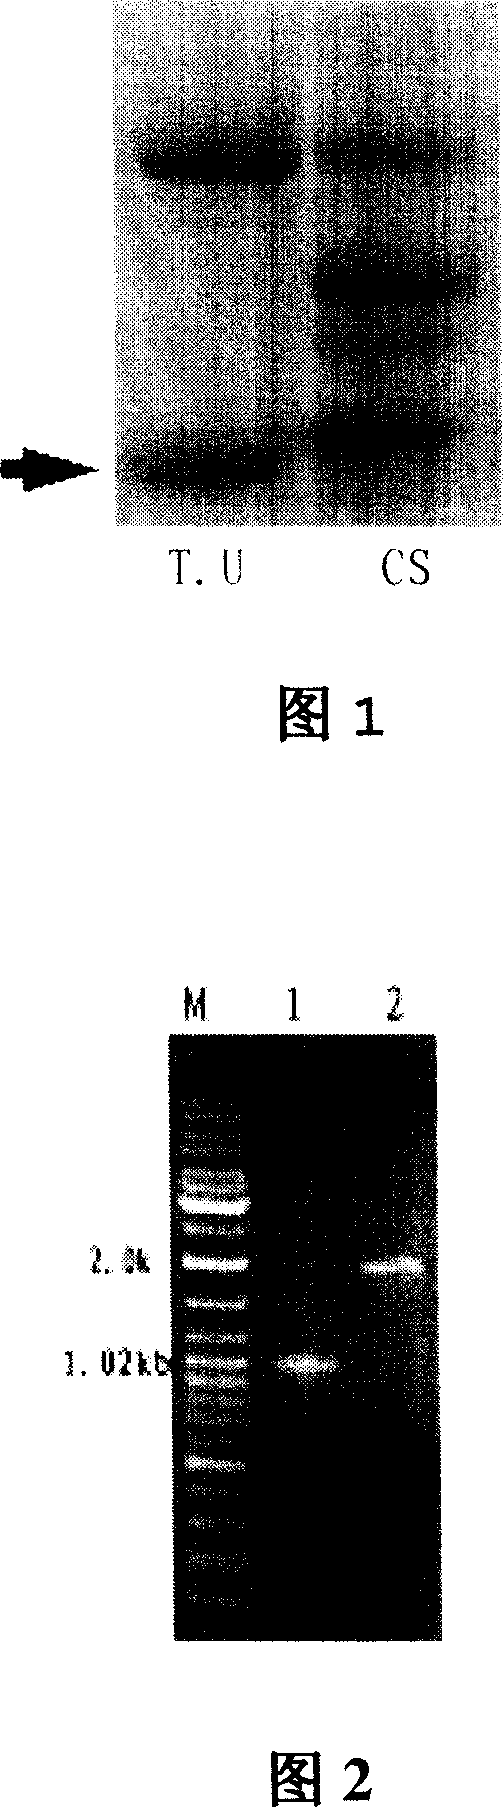 High-molecular wheat glutelin subunit gene, nucleic acid sequence of promoter thereof, and application thereof